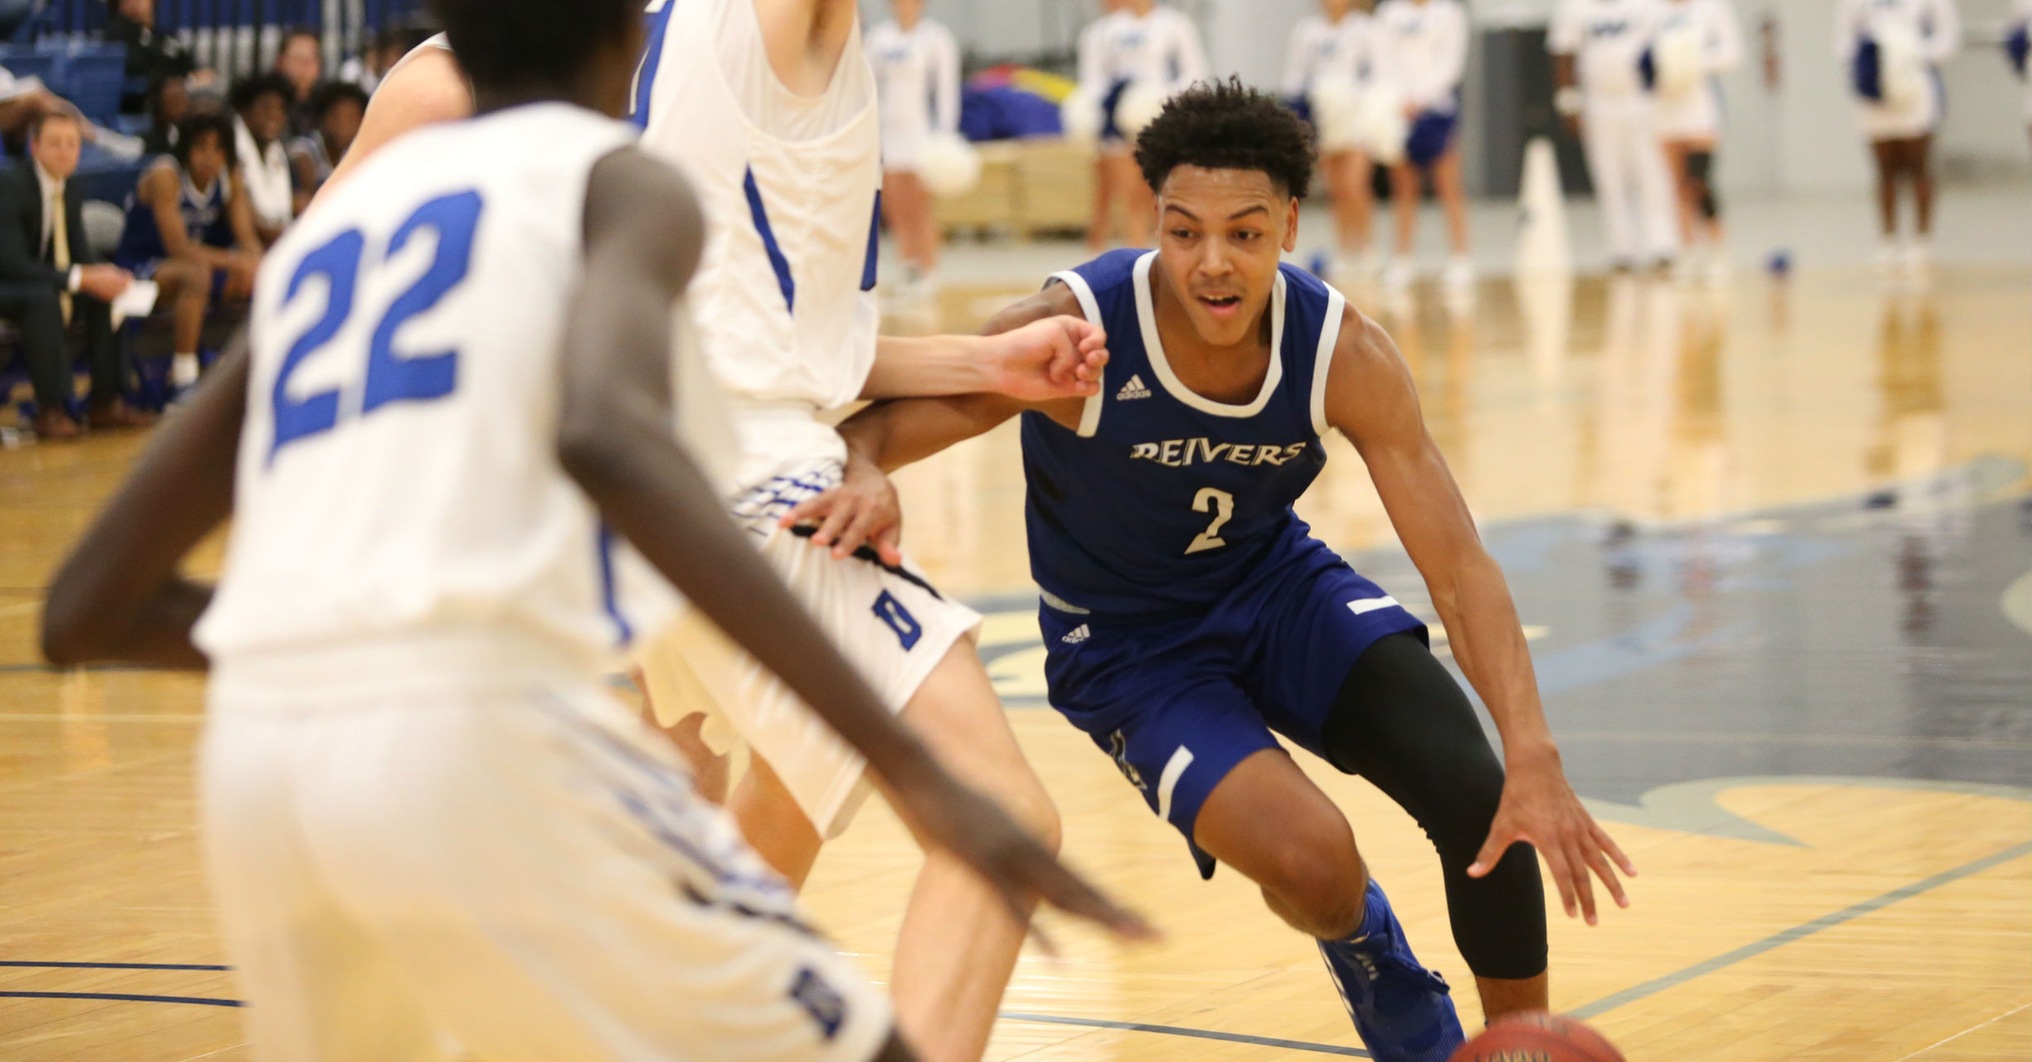 Jo Strong and his Reiver teammates were not quite able to win their second game over an NJCAA Top Ten team in a week, as they fell to Hutchinson Saturday (11/16) afternoon.